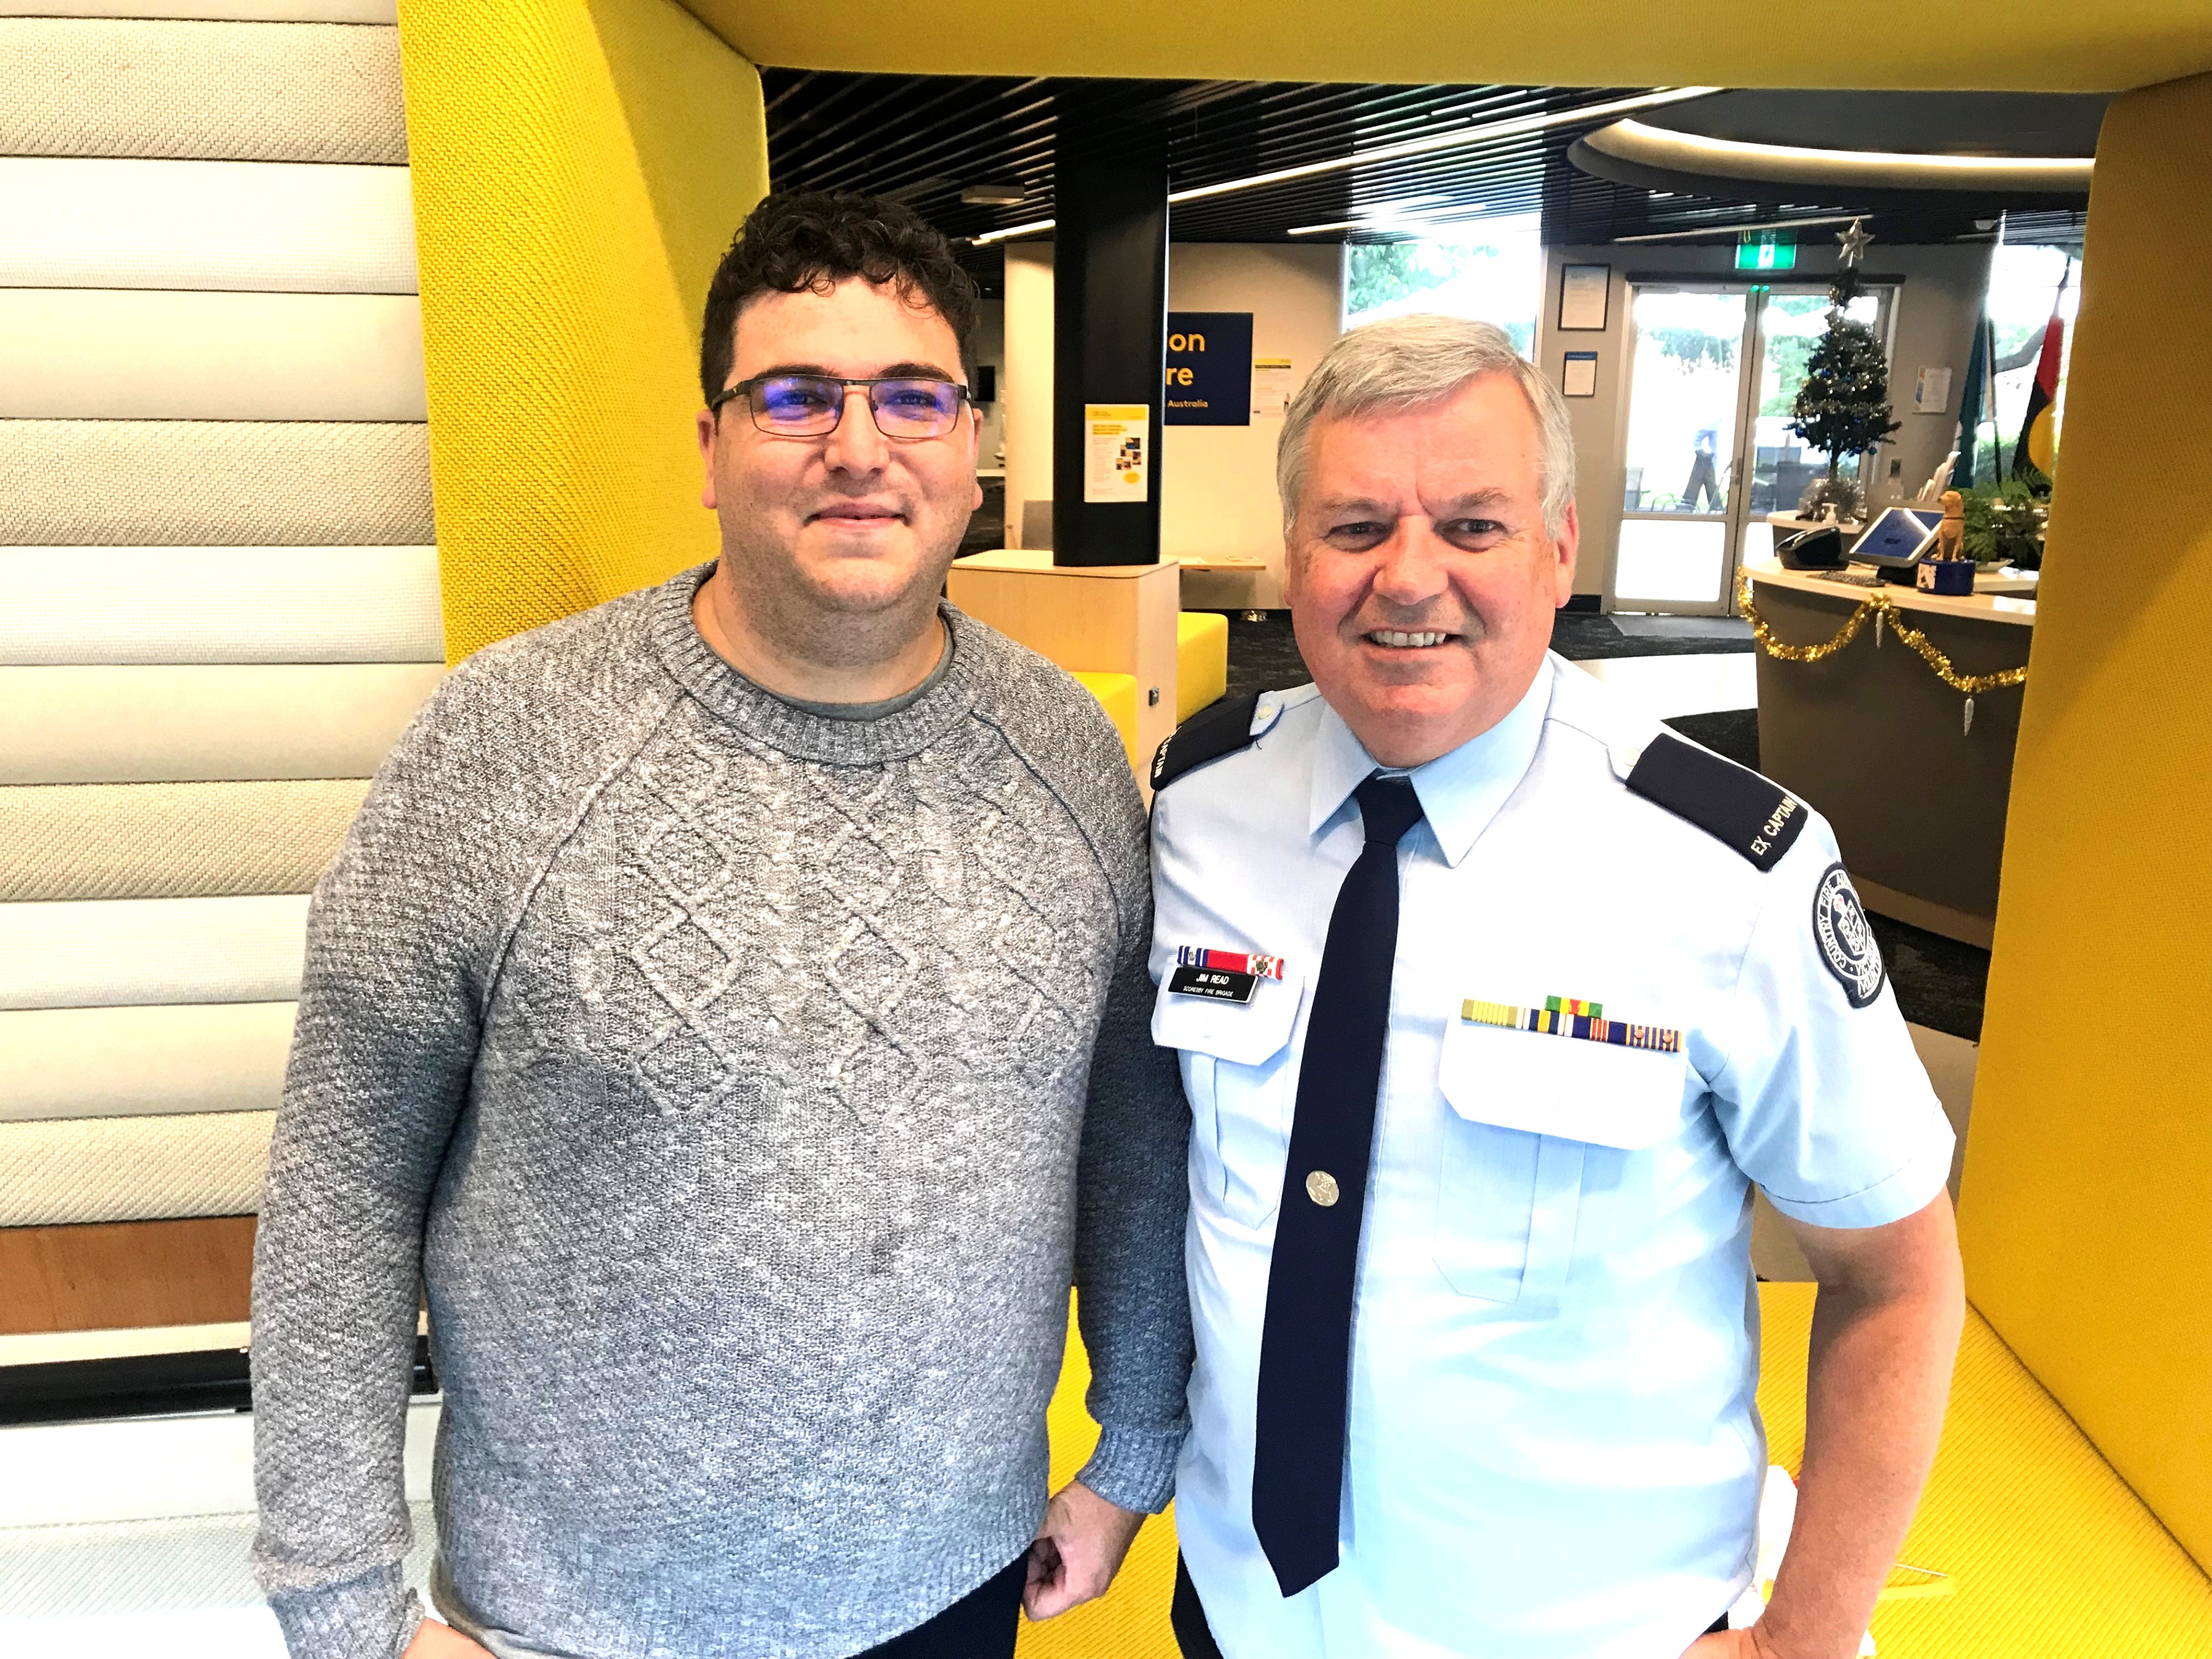 CFA volunteer Jim Read dressed in uniform standing with Josh from the CFA podcast